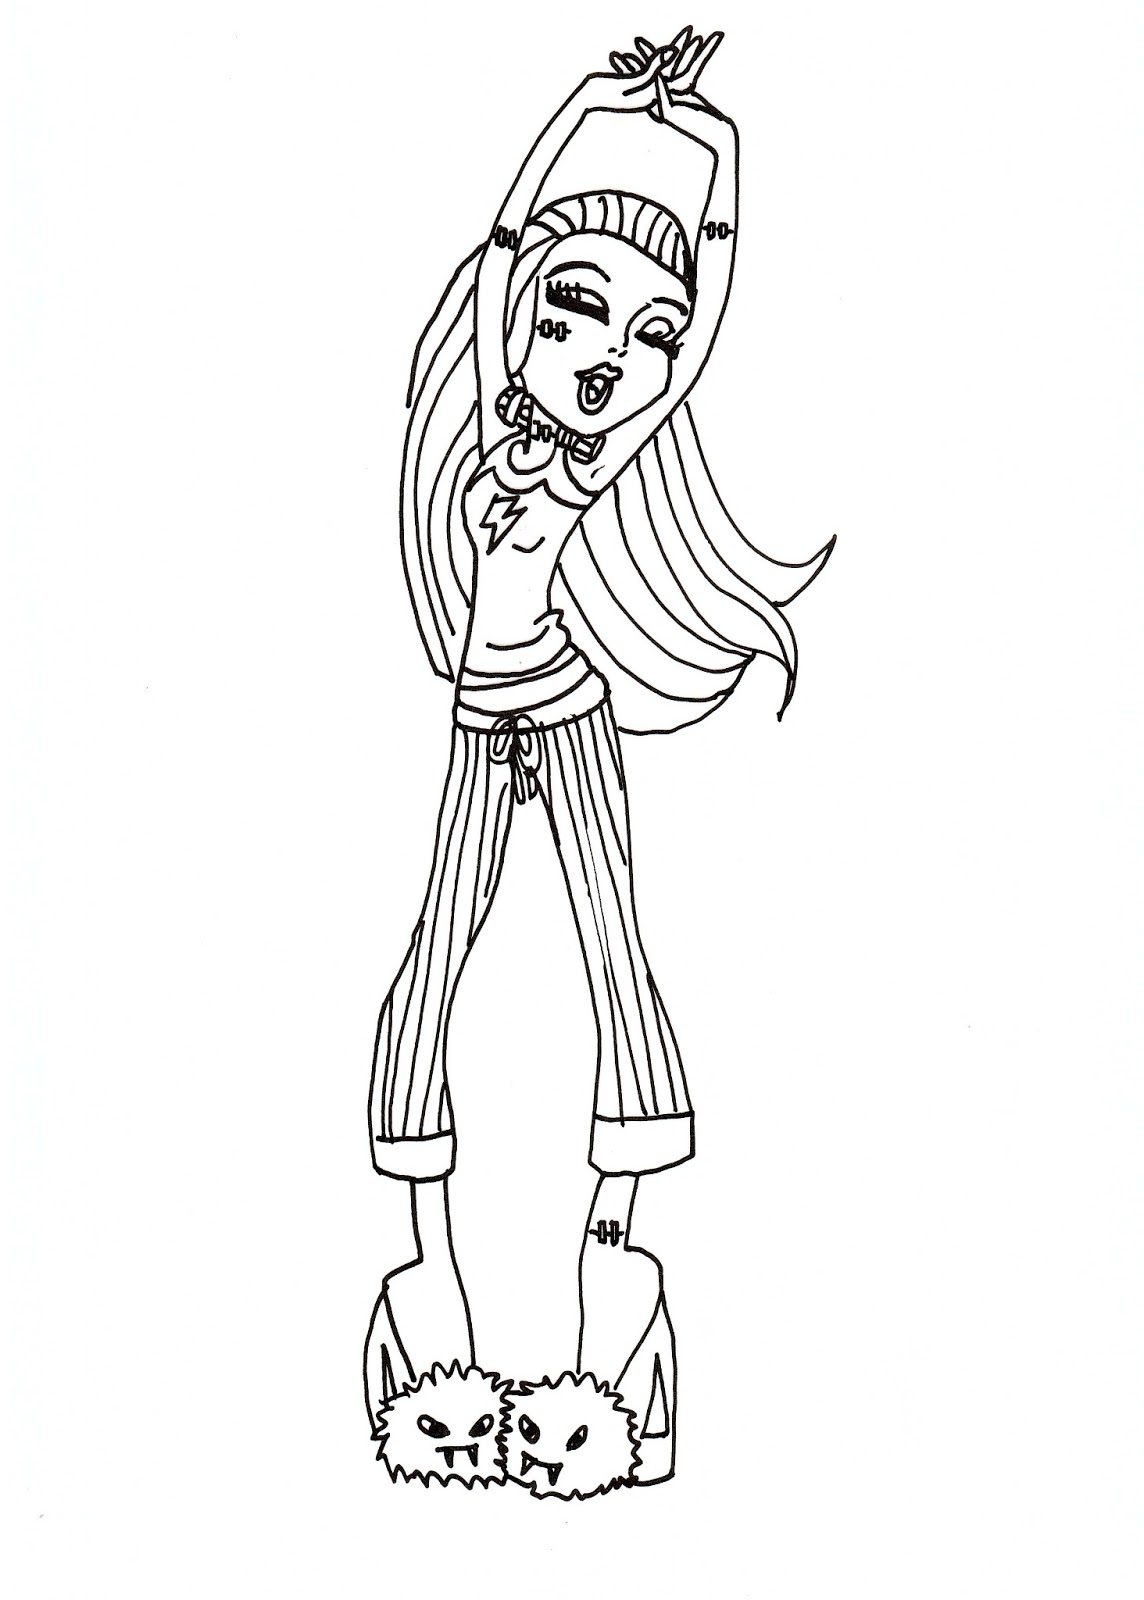 Download Free Printable Monster High Coloring Pages: October 2012